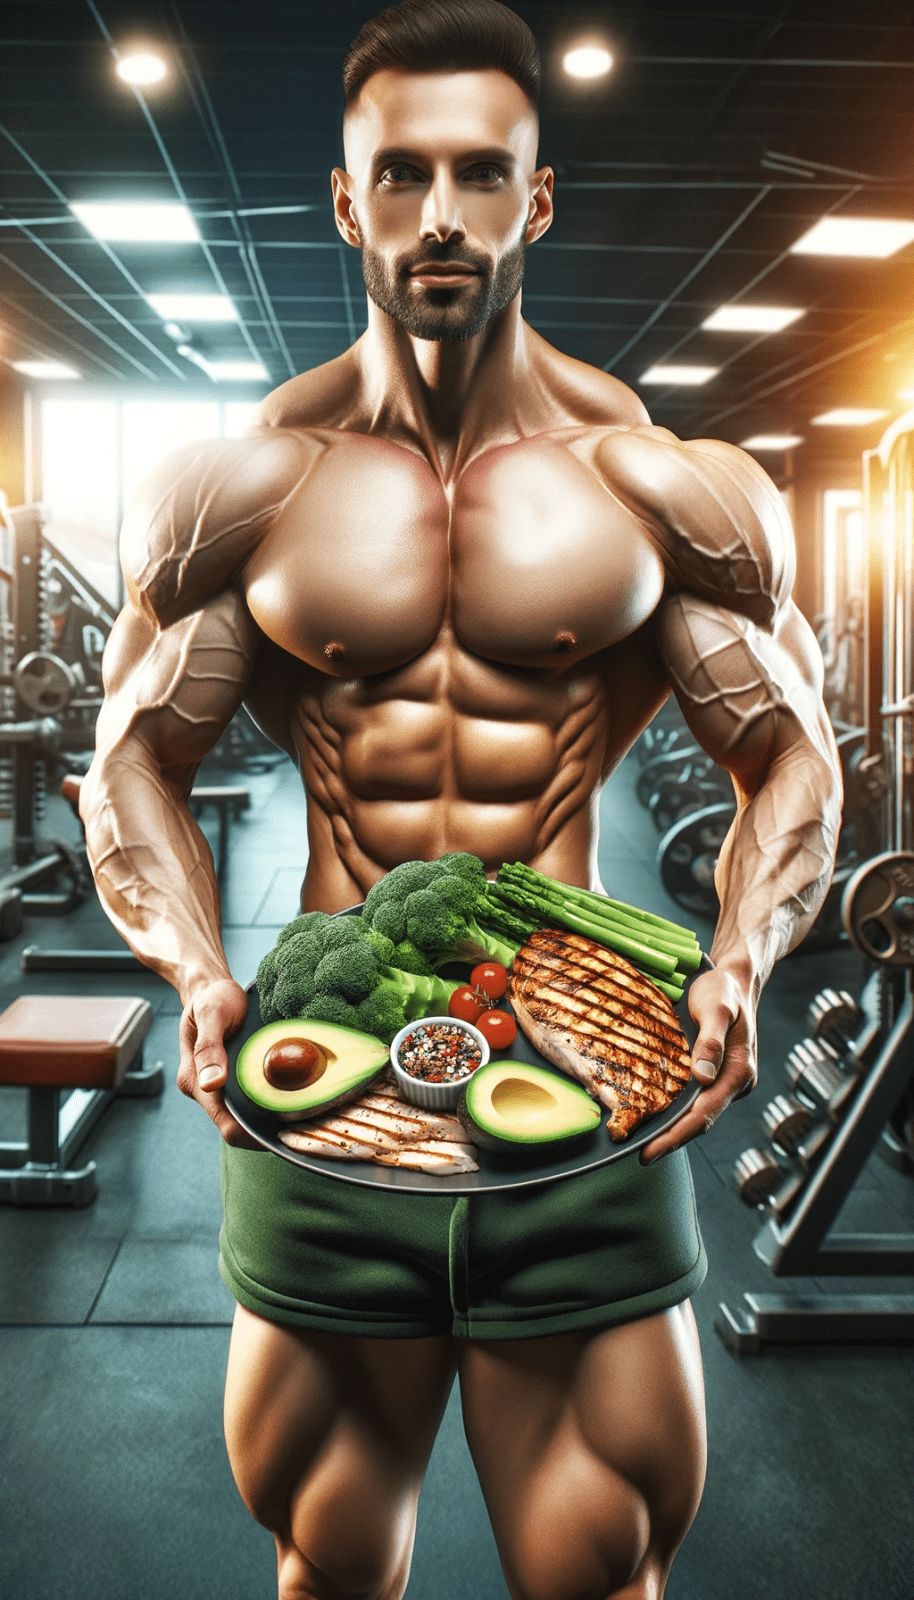 Keto Diet and Bodybuilding: A Powerful Combination for Peak Performance